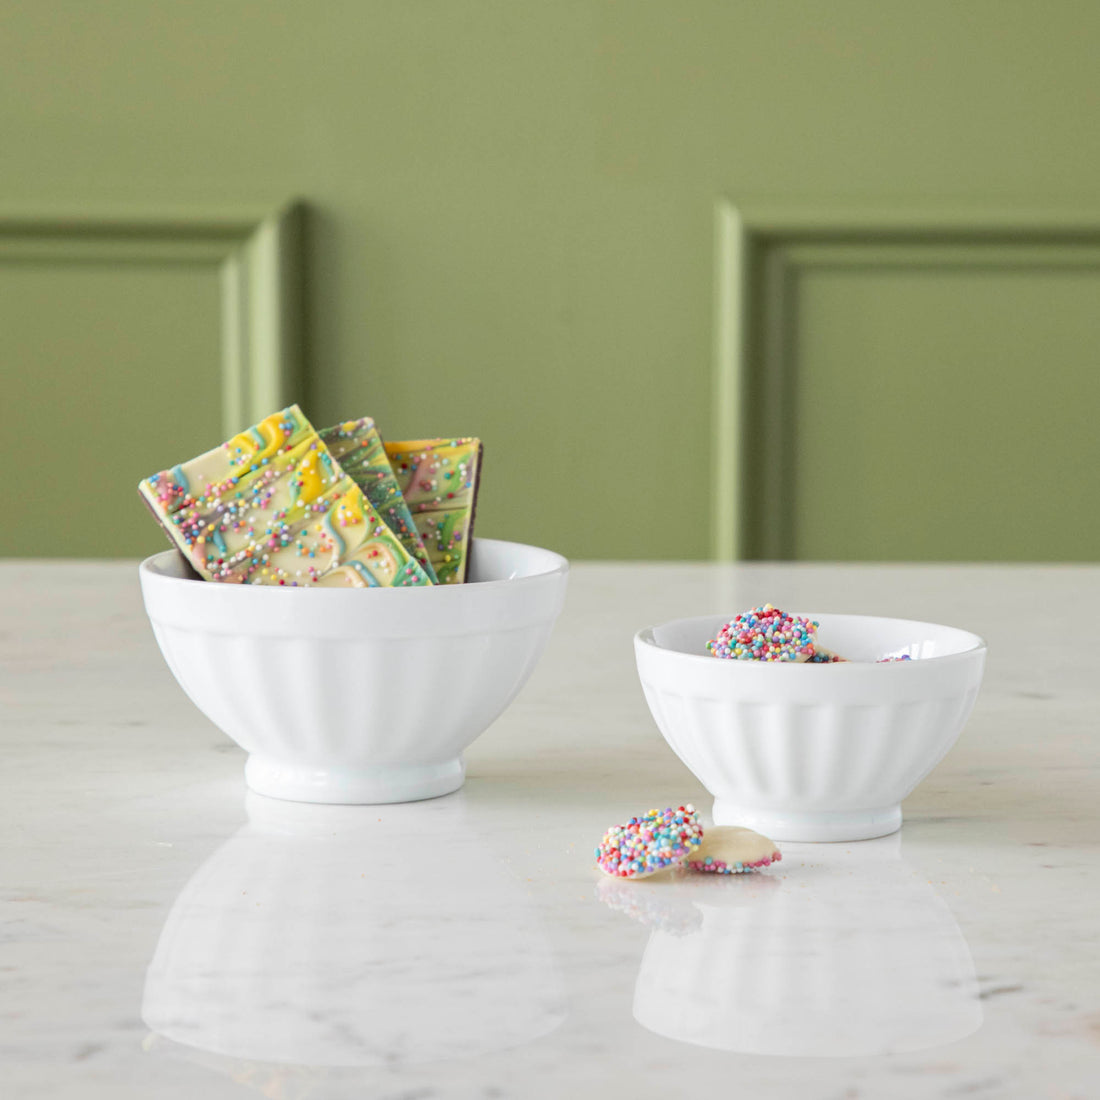 Two white BIA porcelain fluted bowls on a marble surface, one containing sprinkled chocolate bars and the other with chocolate pieces covered in sprinkles.